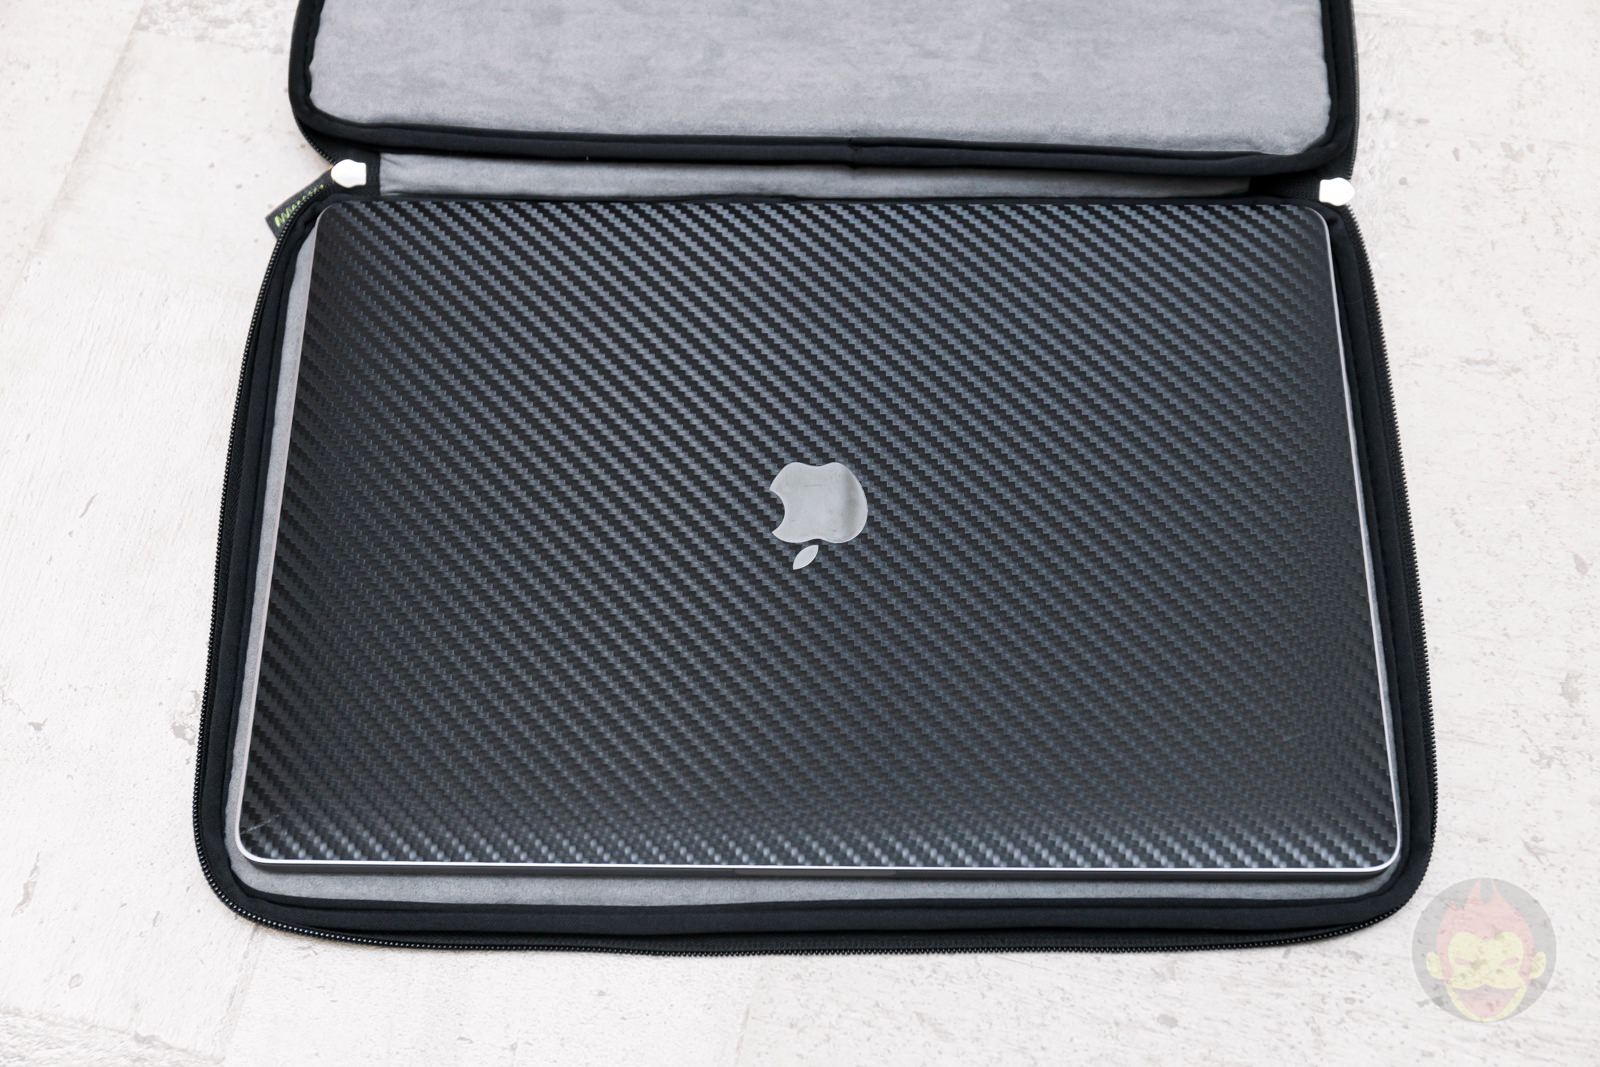 Simplism-BookZip-Case-for-MBP16-review-11.jpg